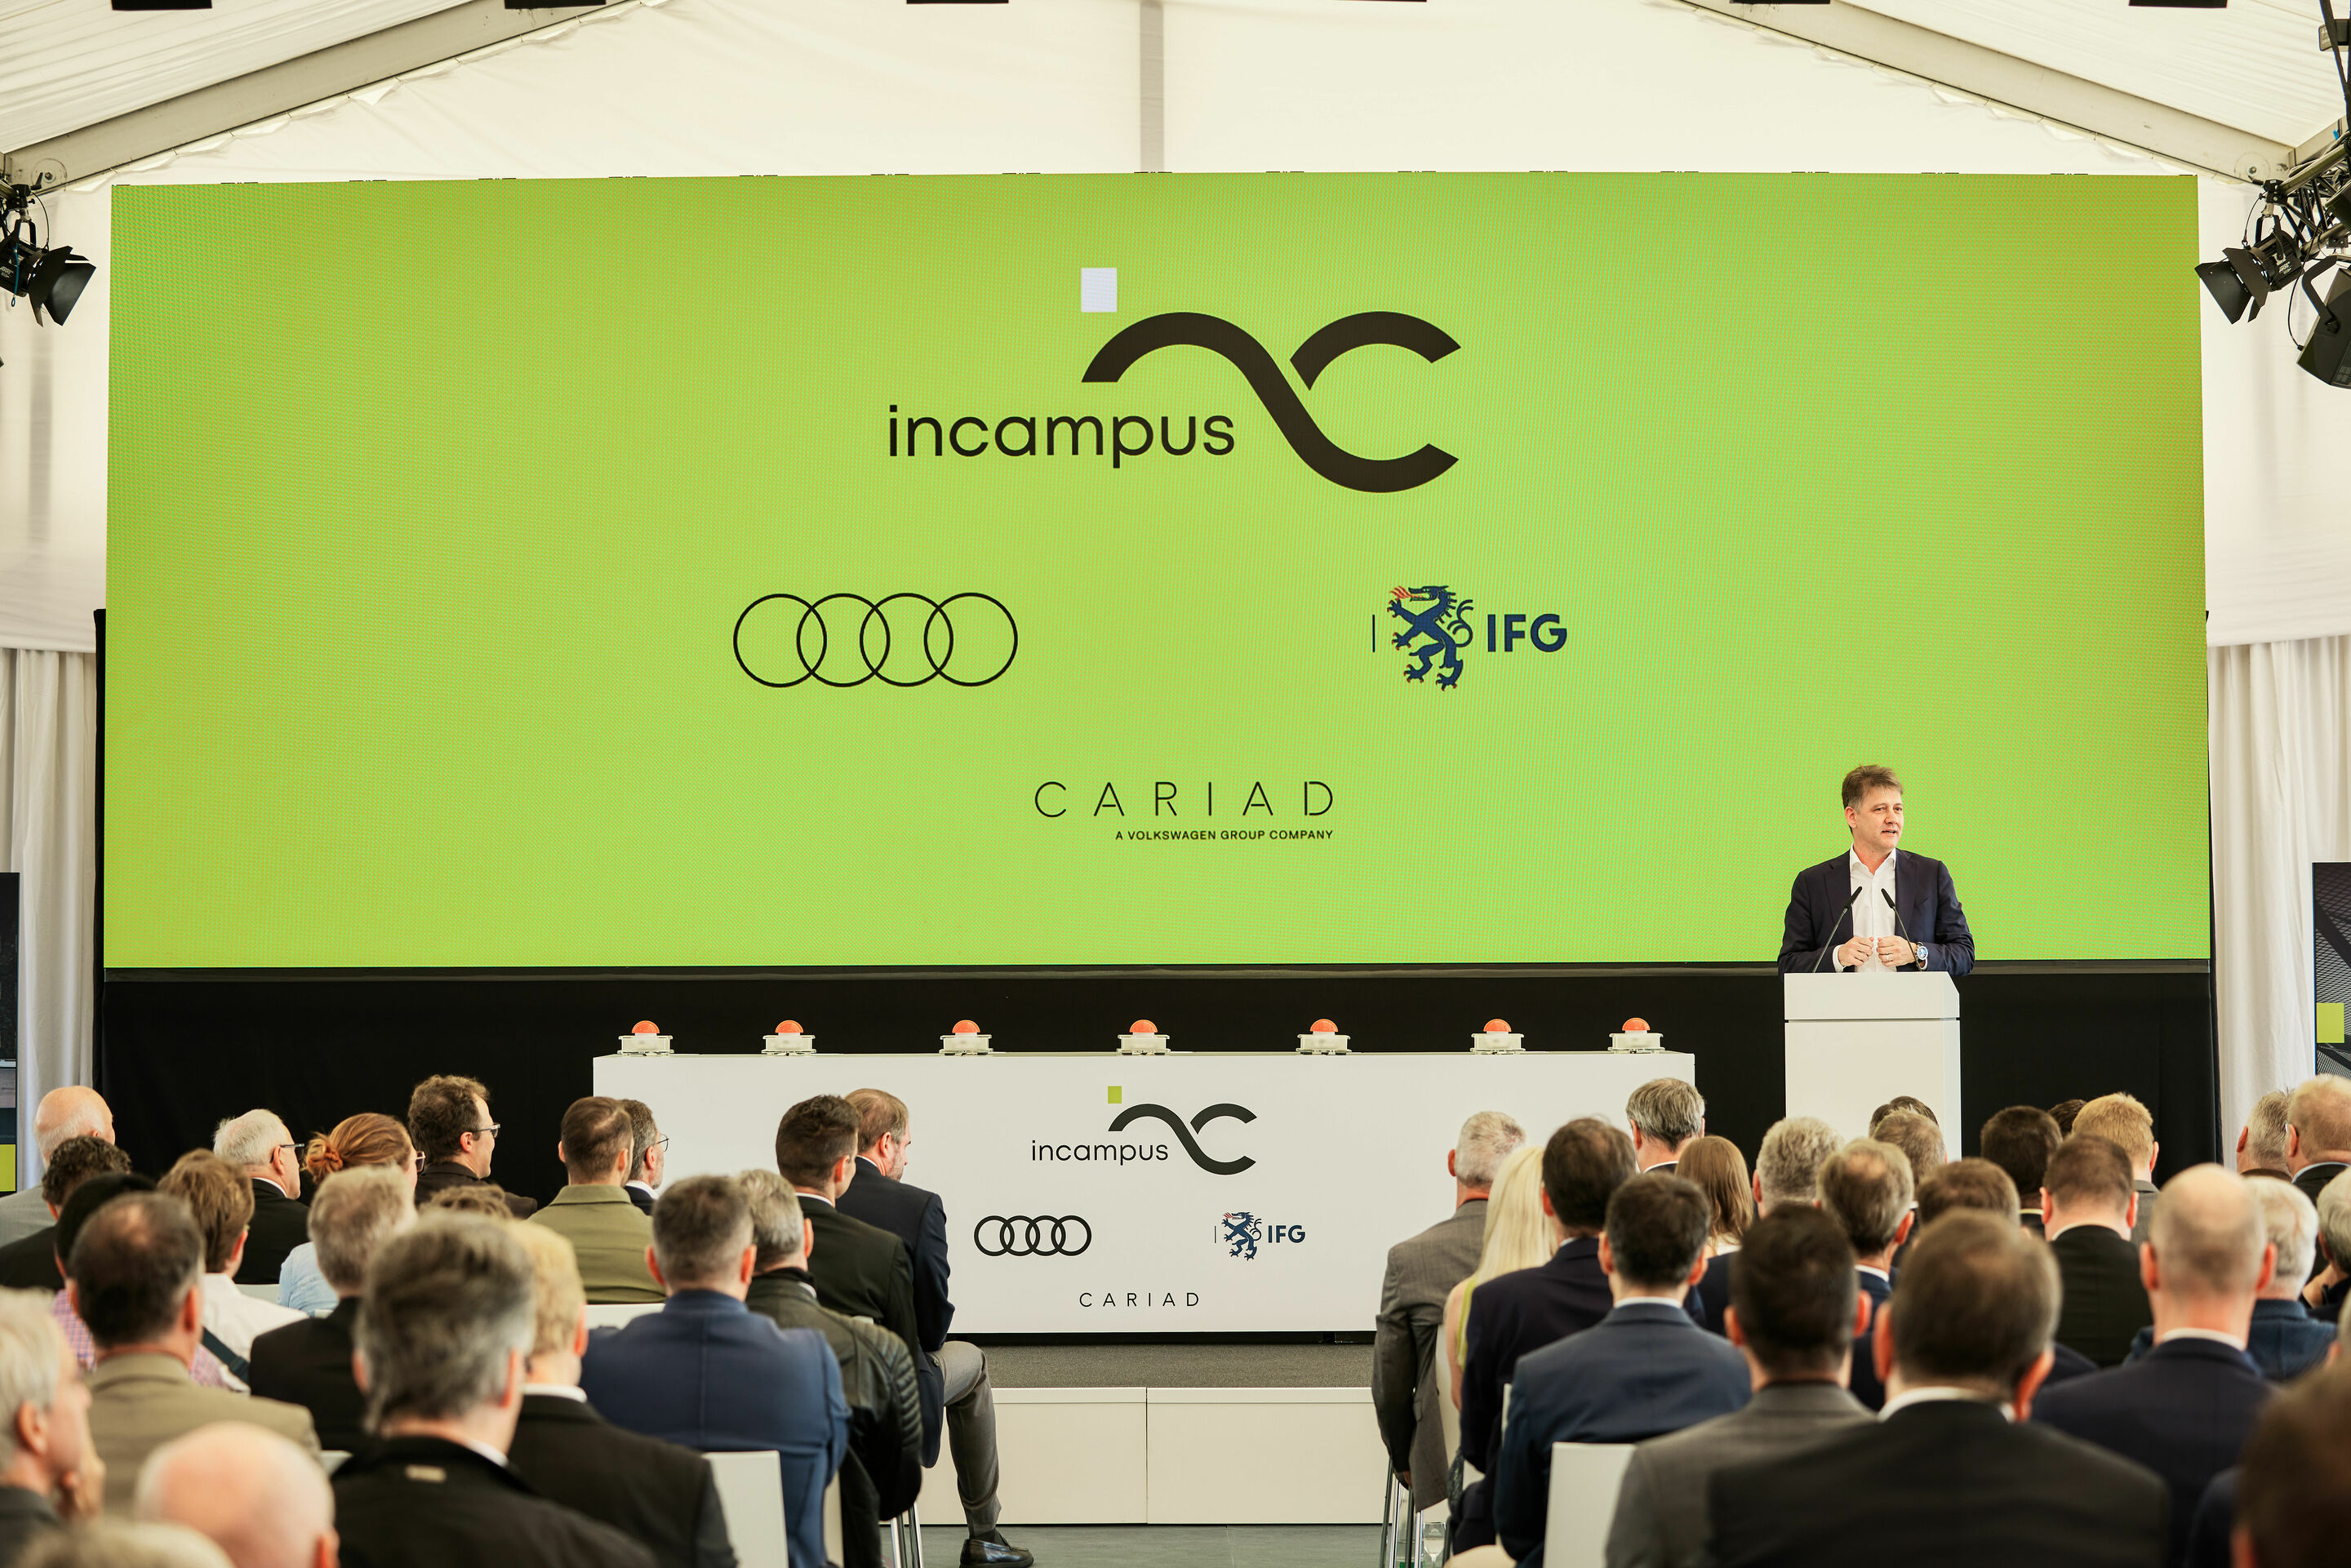 incampus opens in Ingolstadt: Ground for new ideas